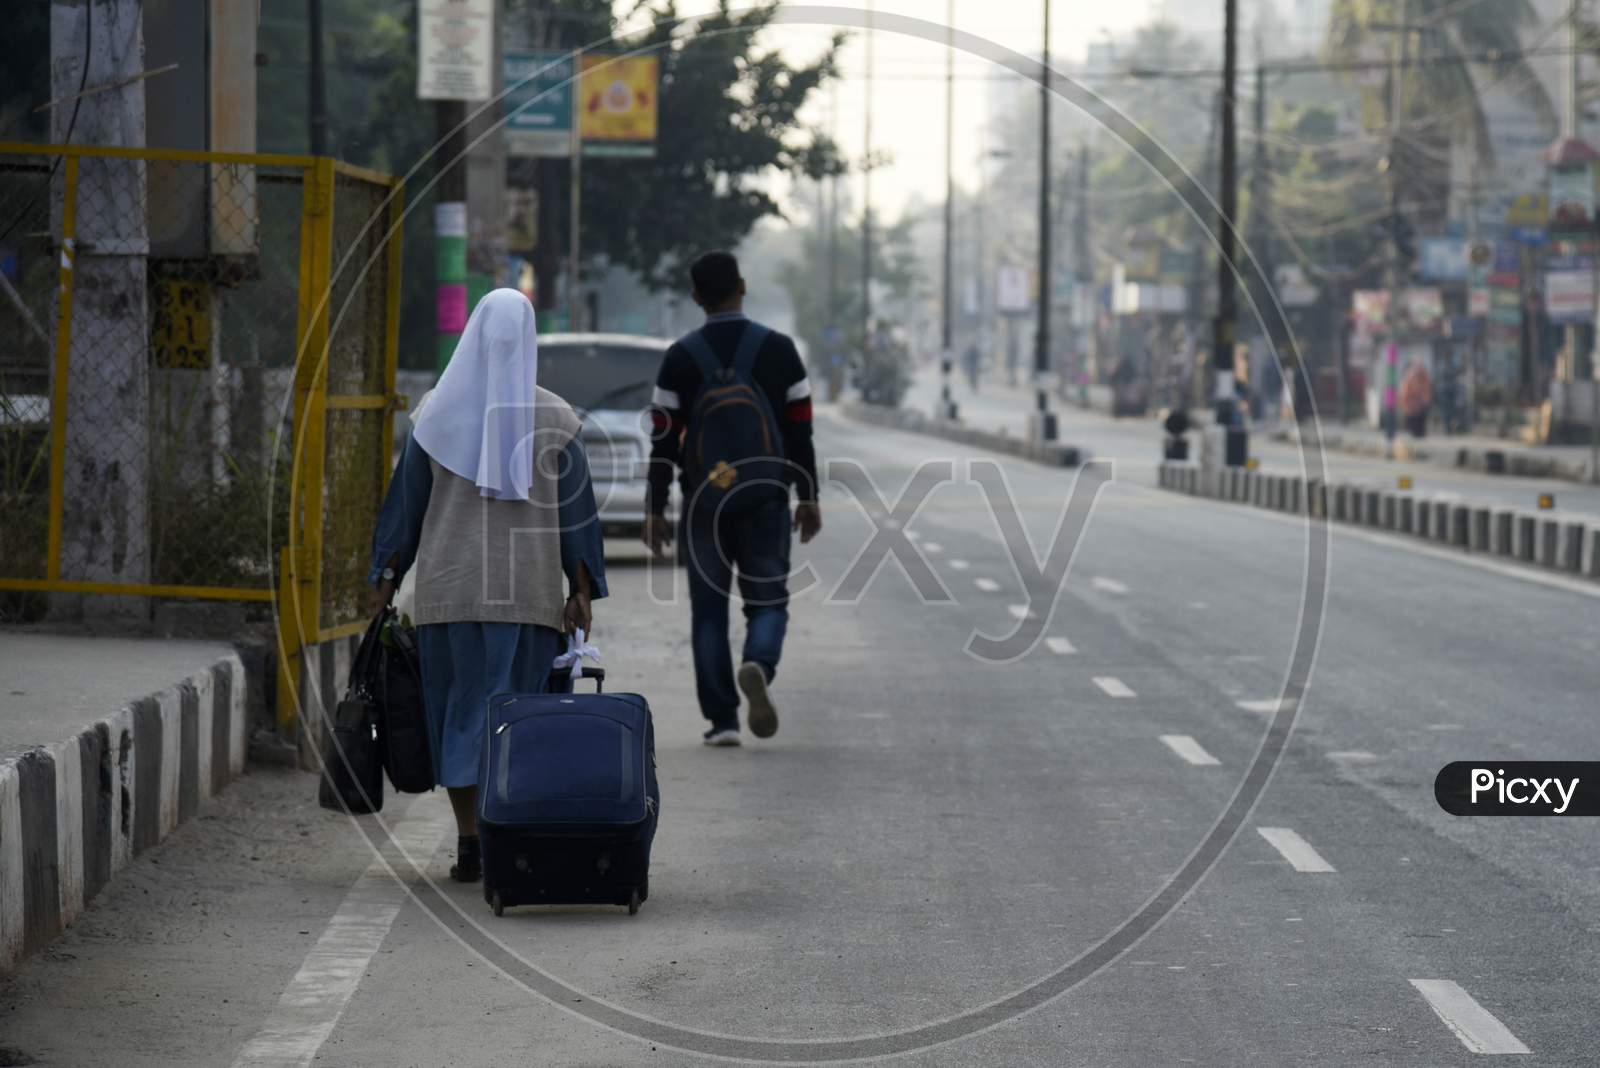 People Walking With Luggage In The Street, During A Strike Called By All Assam Students’ Union (Aasu) And The North East Students’ Organisation (Neso) In Protest Against The Citizenship Amendment Bill, In Guwahati